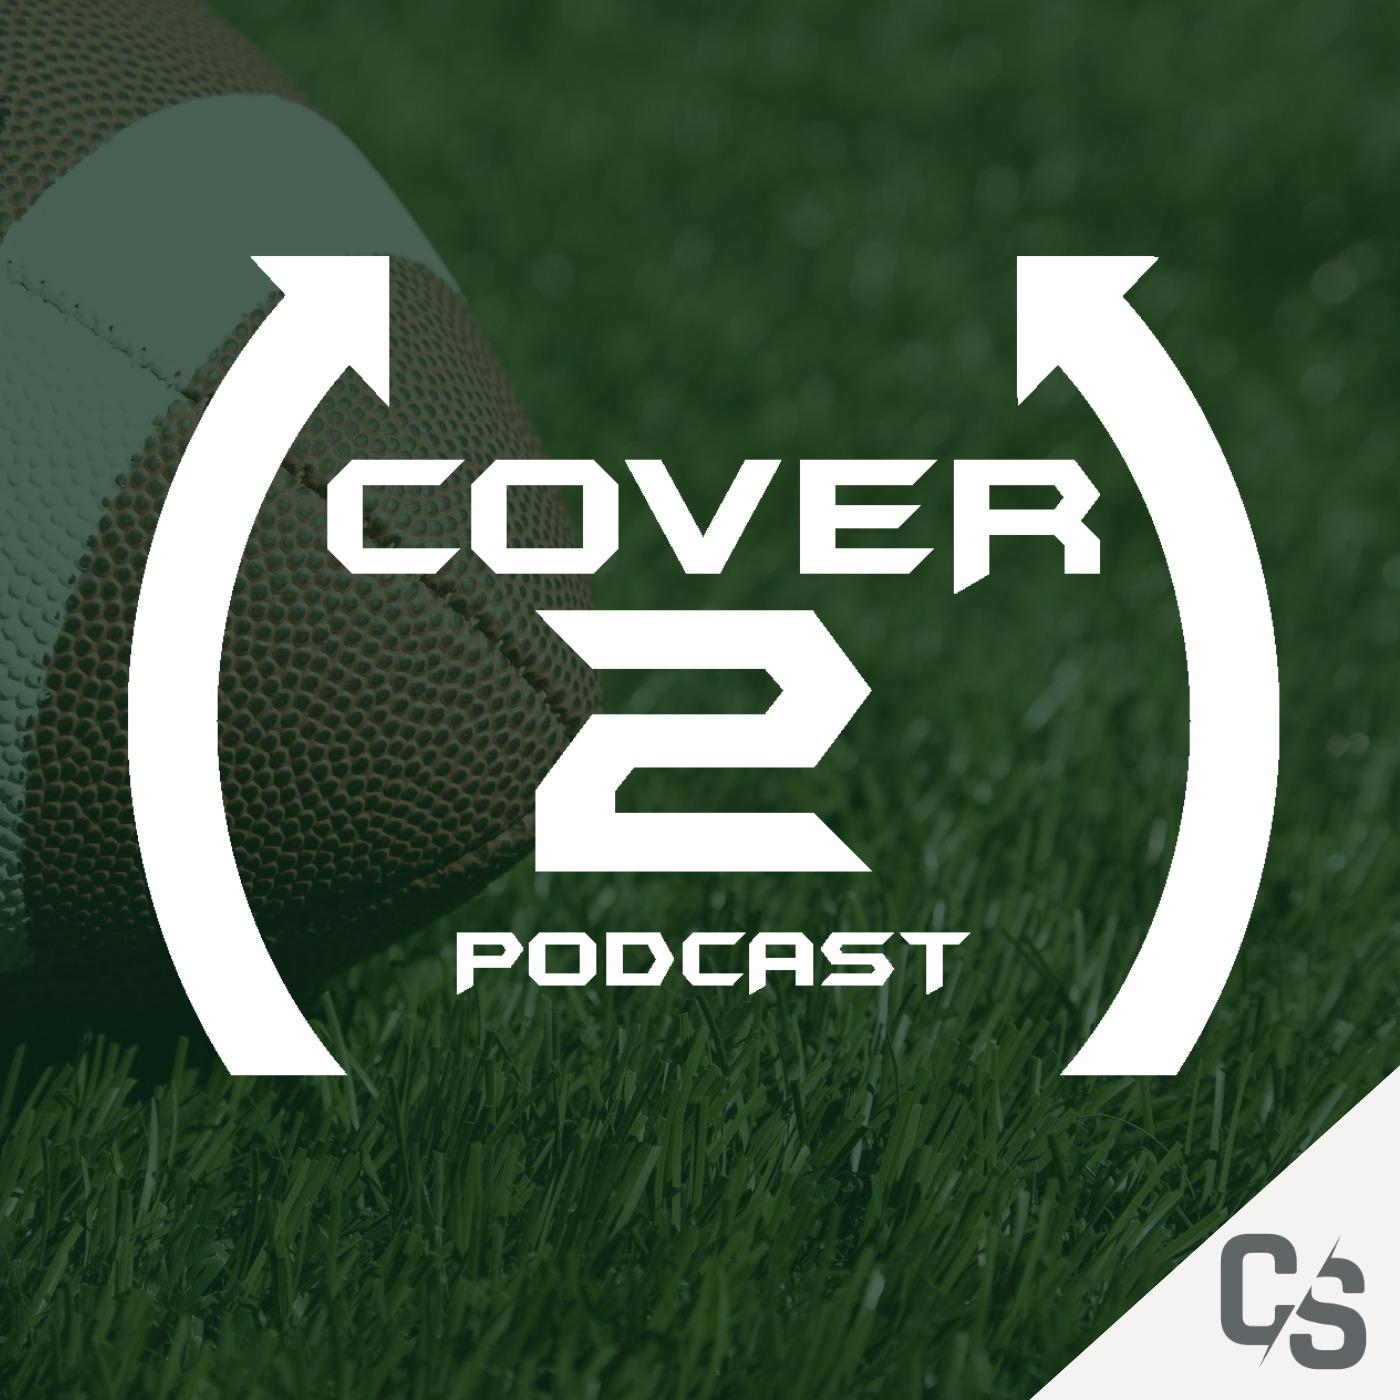 Cover 2 Podcast